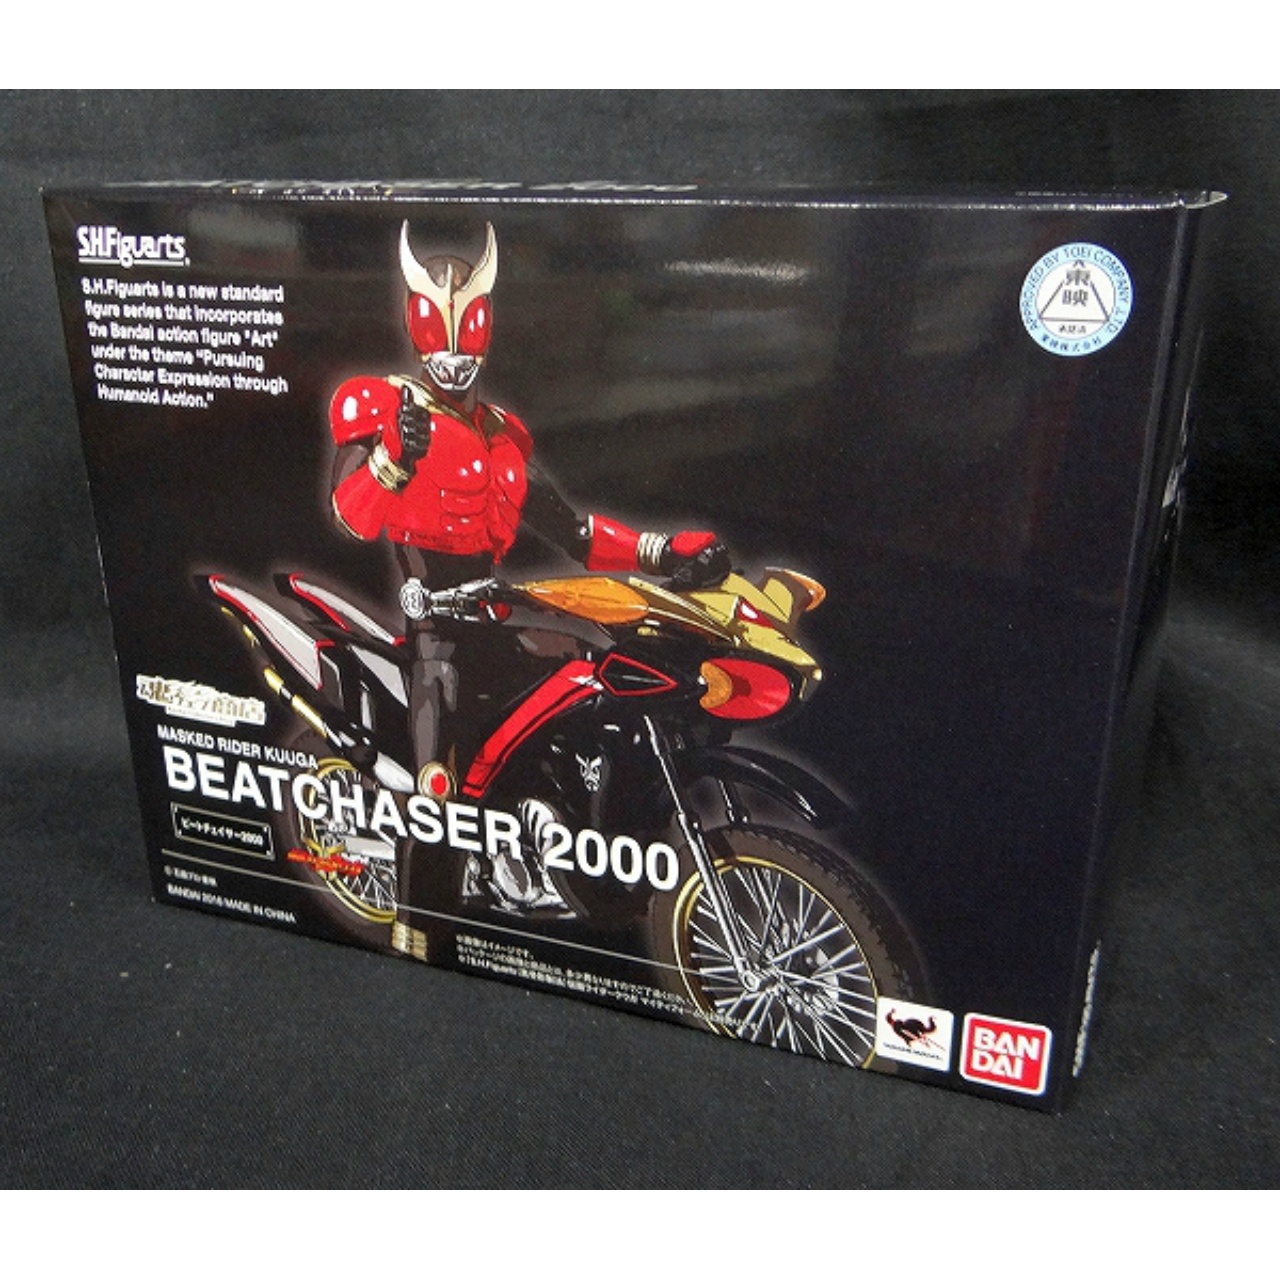 S.H.Figuarts Beat Chaser 2000